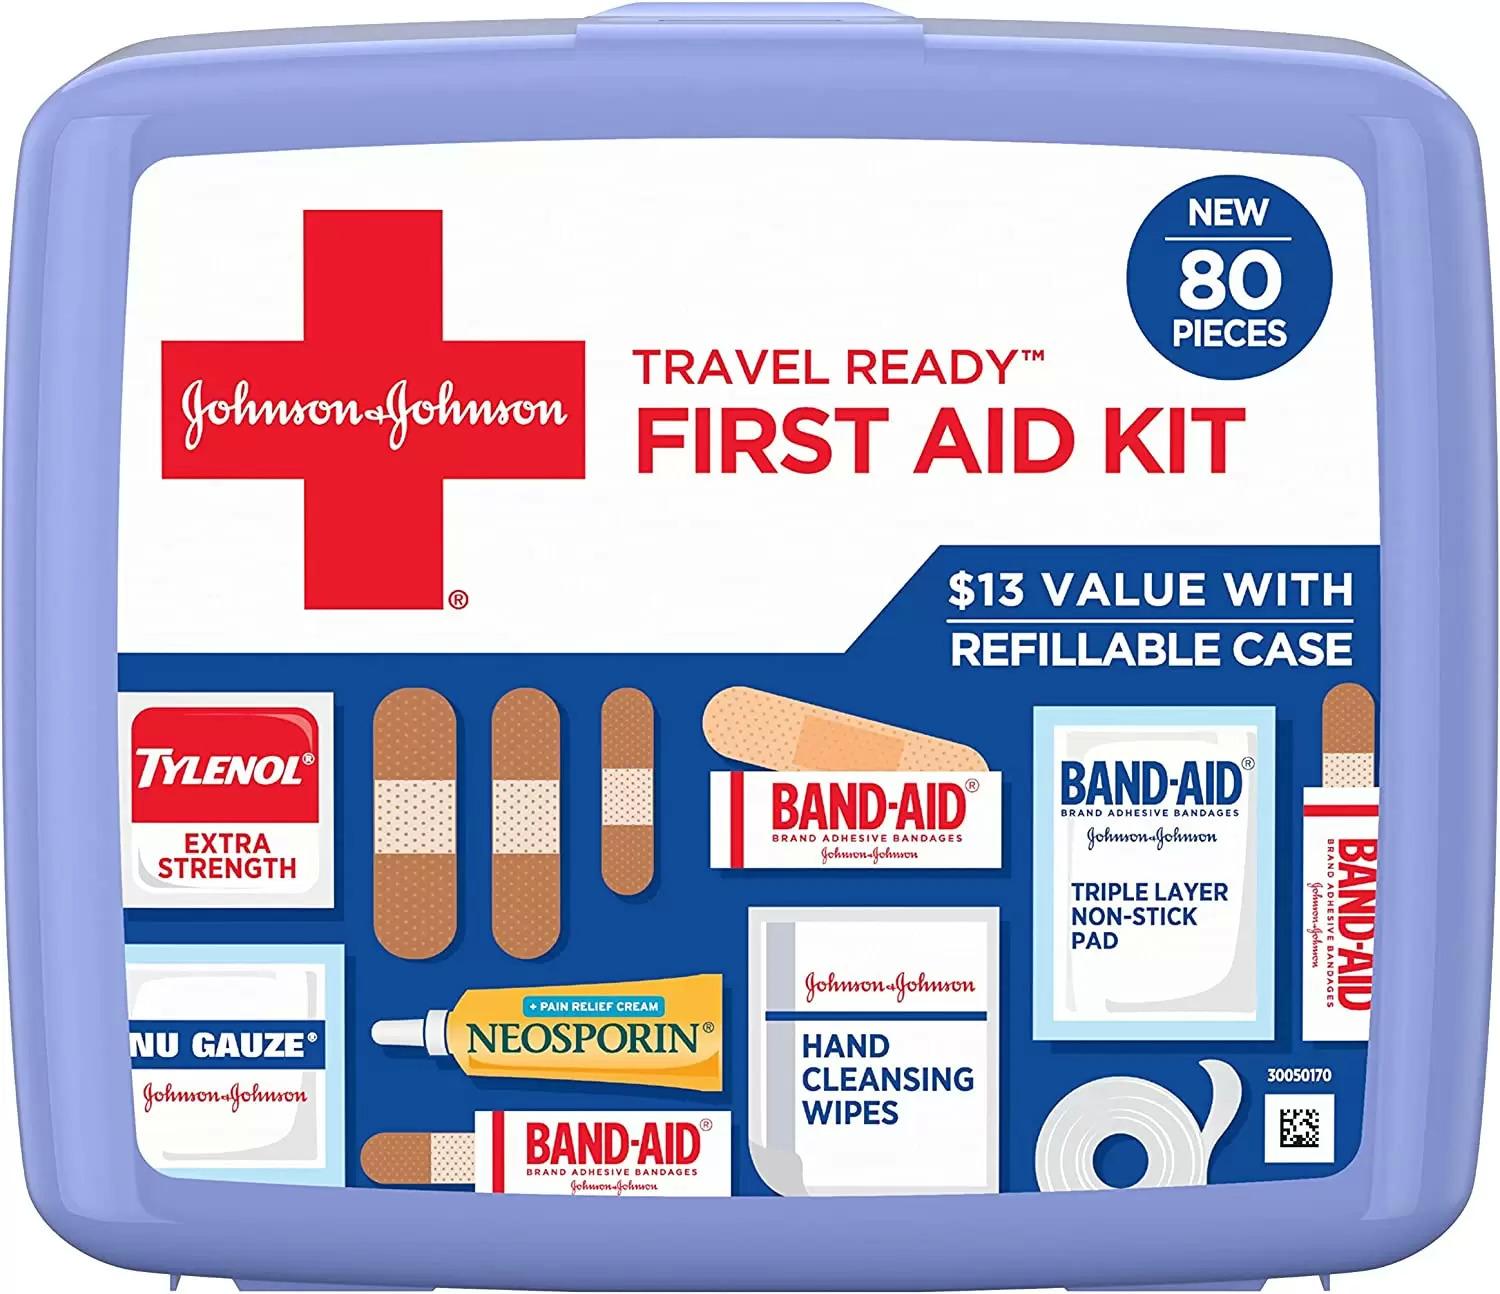 Johnson and Johnson Travel Ready First Aid Kit for $7.52